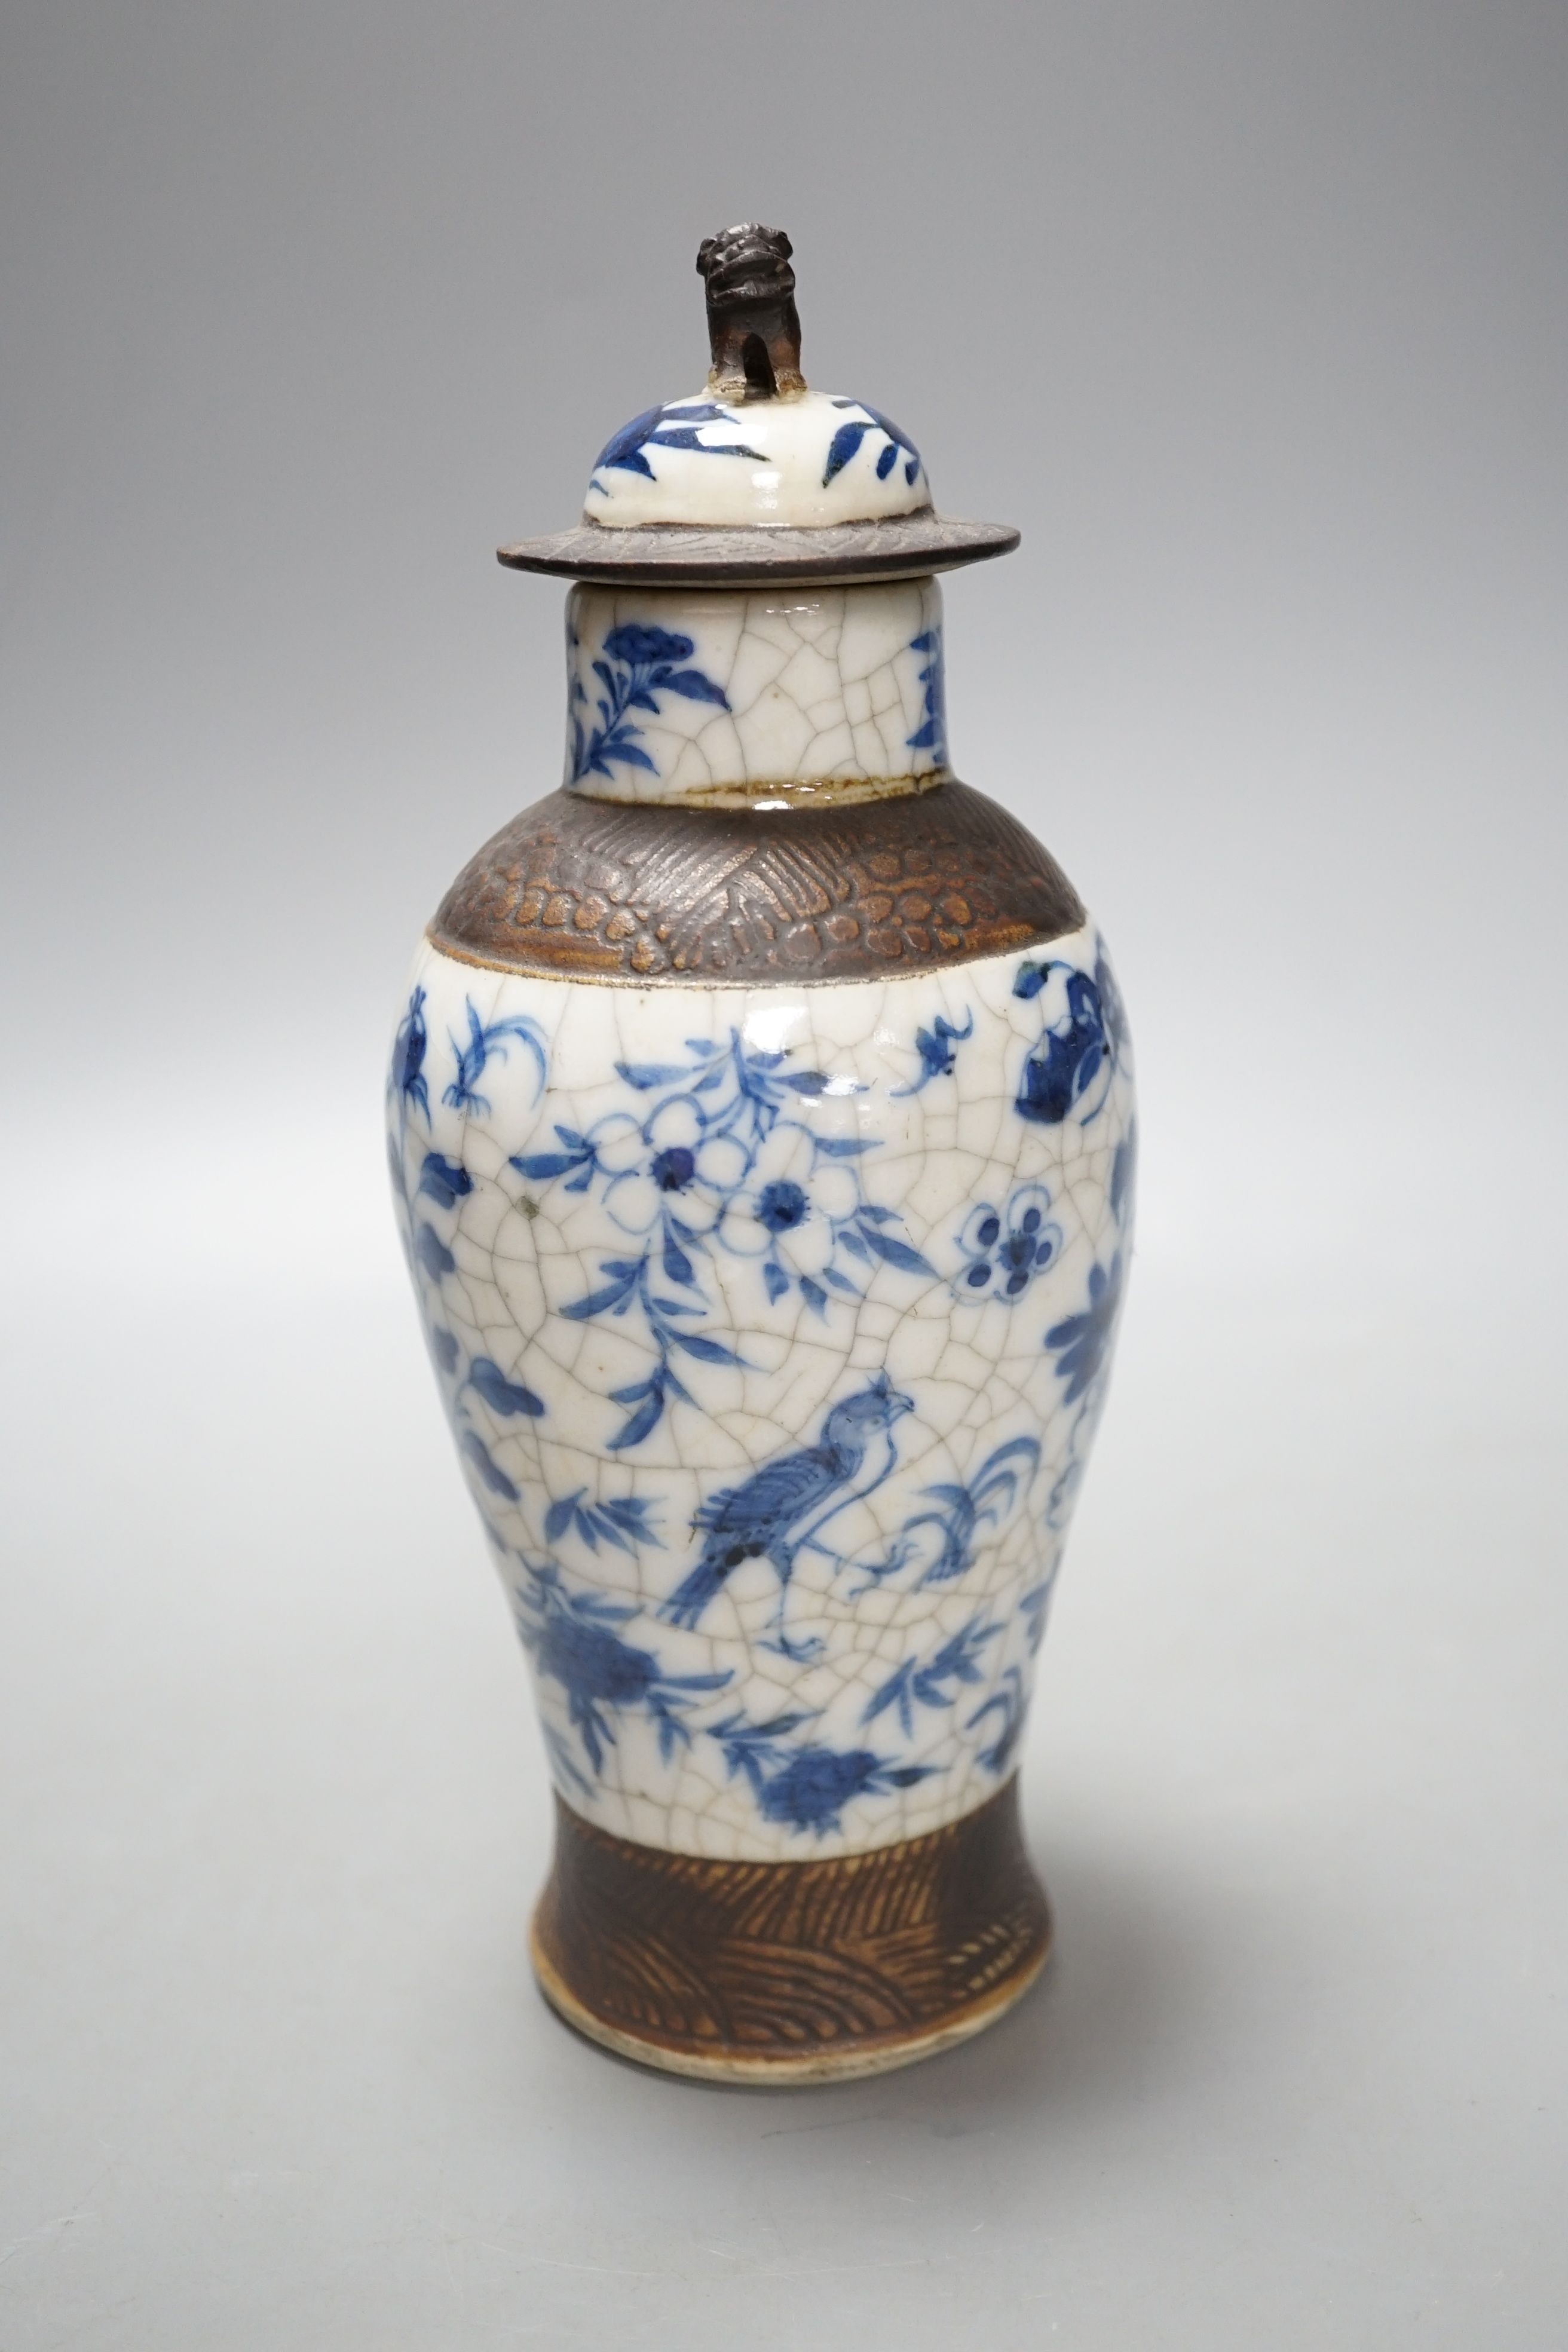 A Chinese blue and white crackle ware vase, c.1900, 22cms high including cover.